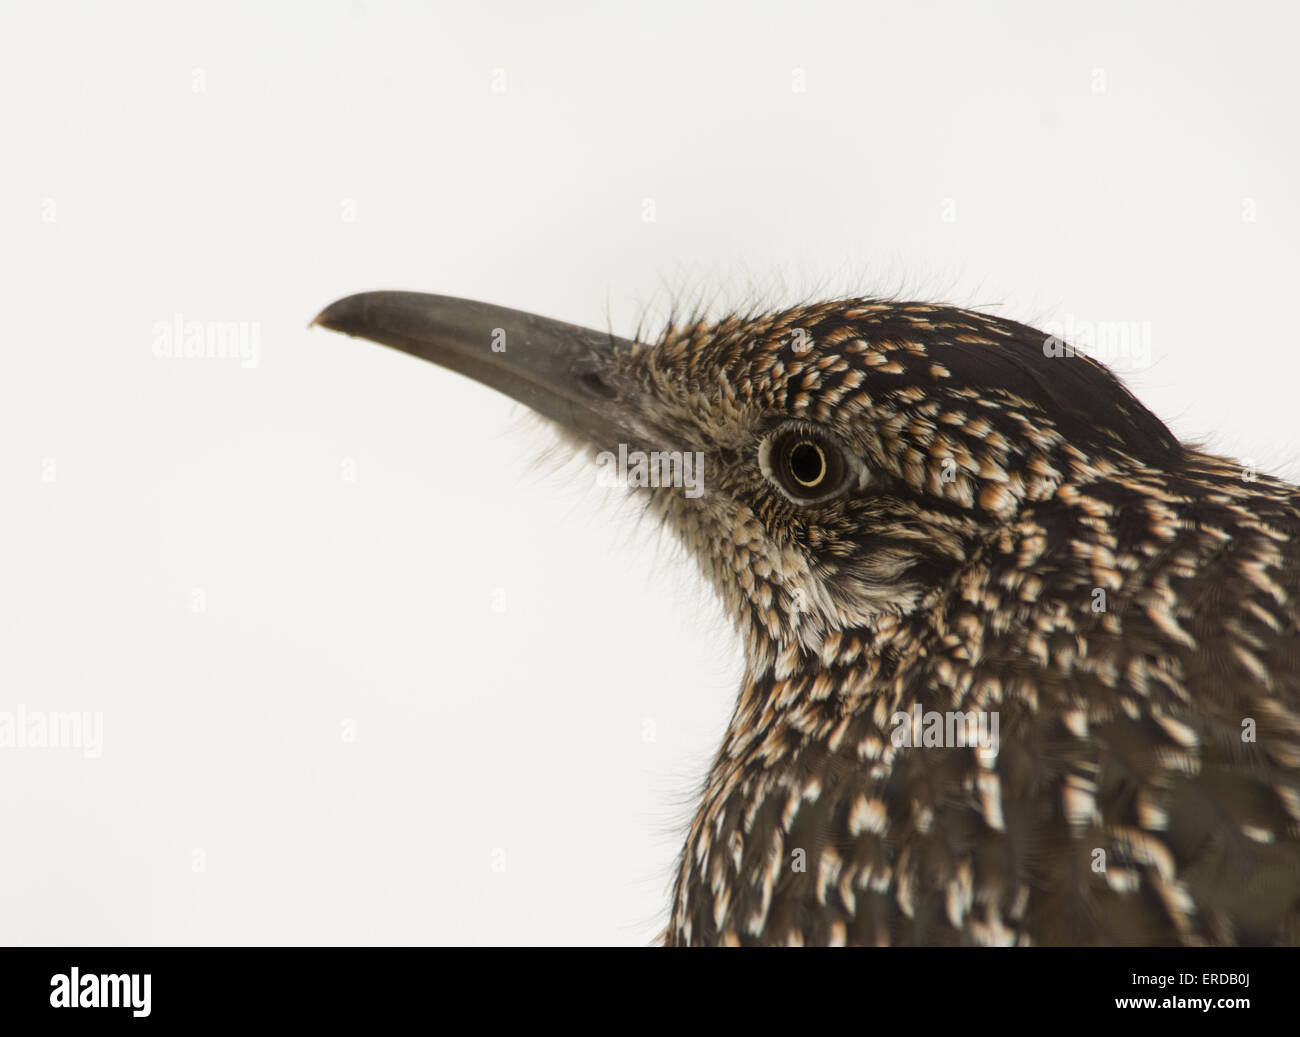 Closeup of a Greater Roadrunner, Geococcyx californianus, waiting for prey against snowy background Stock Photo